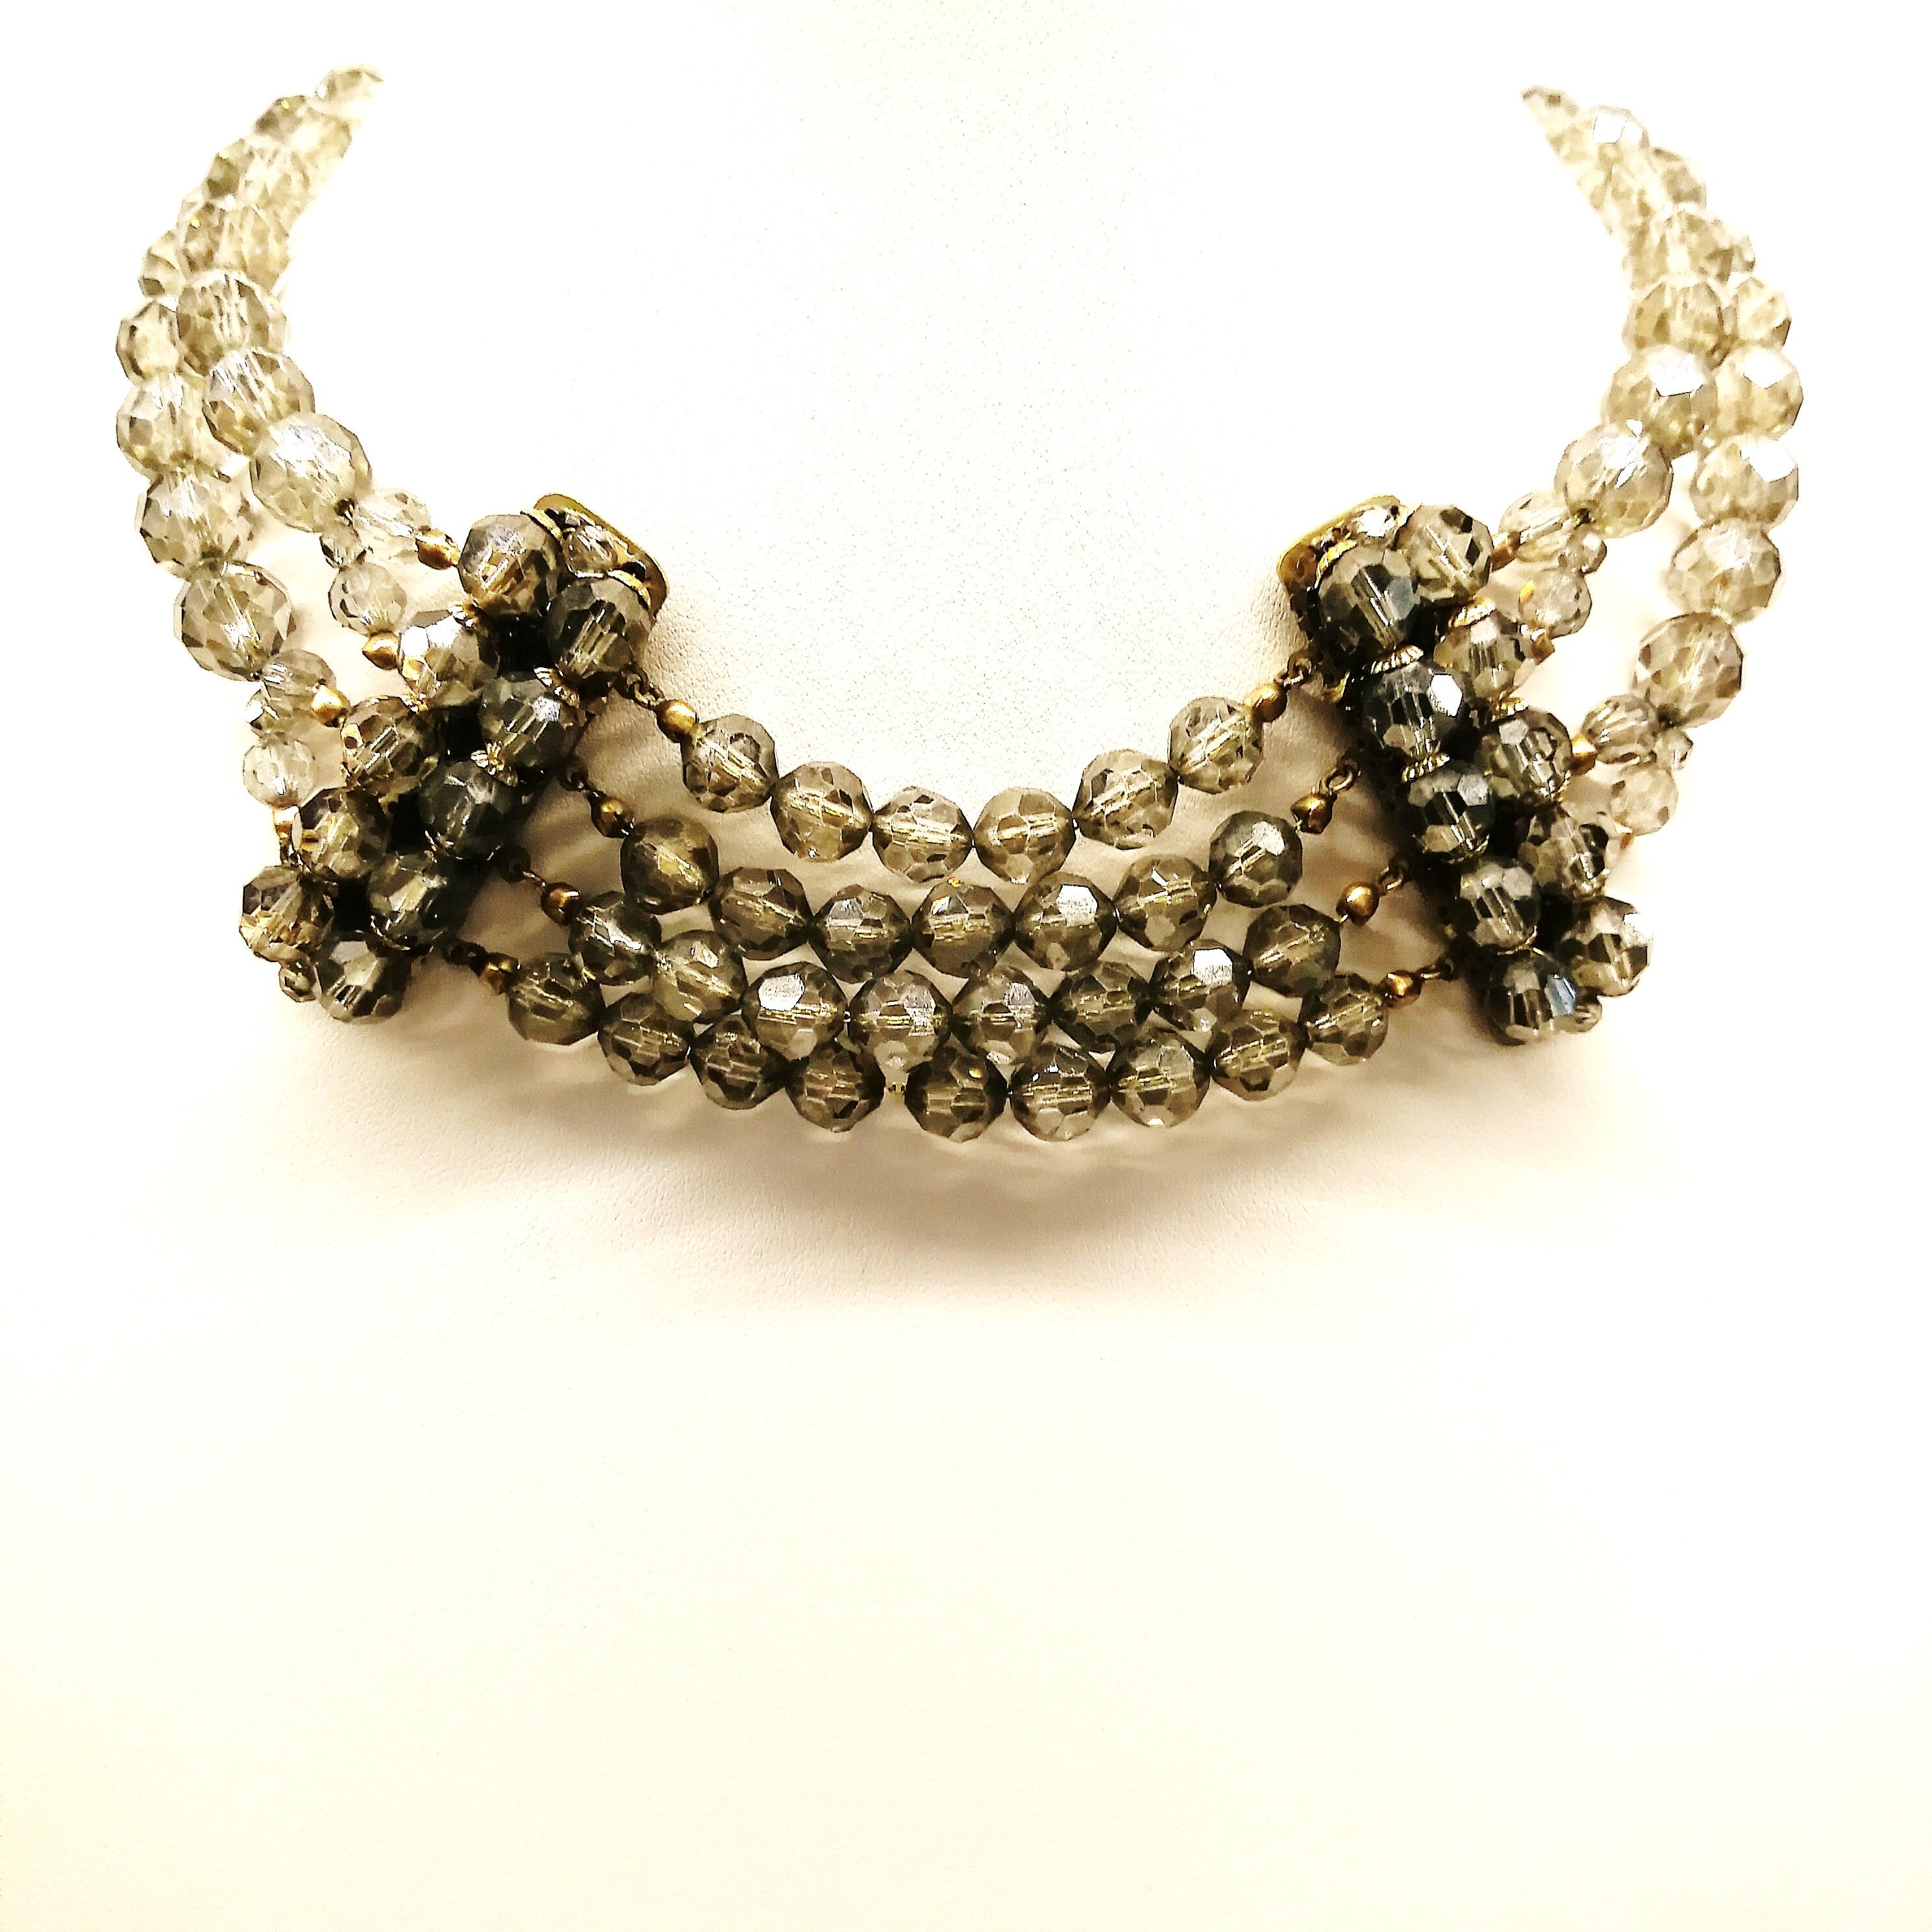 A stylish choker necklace from the celebrated designers/manufacturers Coppola e Toppo, from the late 1940s/early 1950s, in a very subtle but shimmering hue, of smokey grey. The cut and faceting of the beads gives this necklace an exceptional sparkle